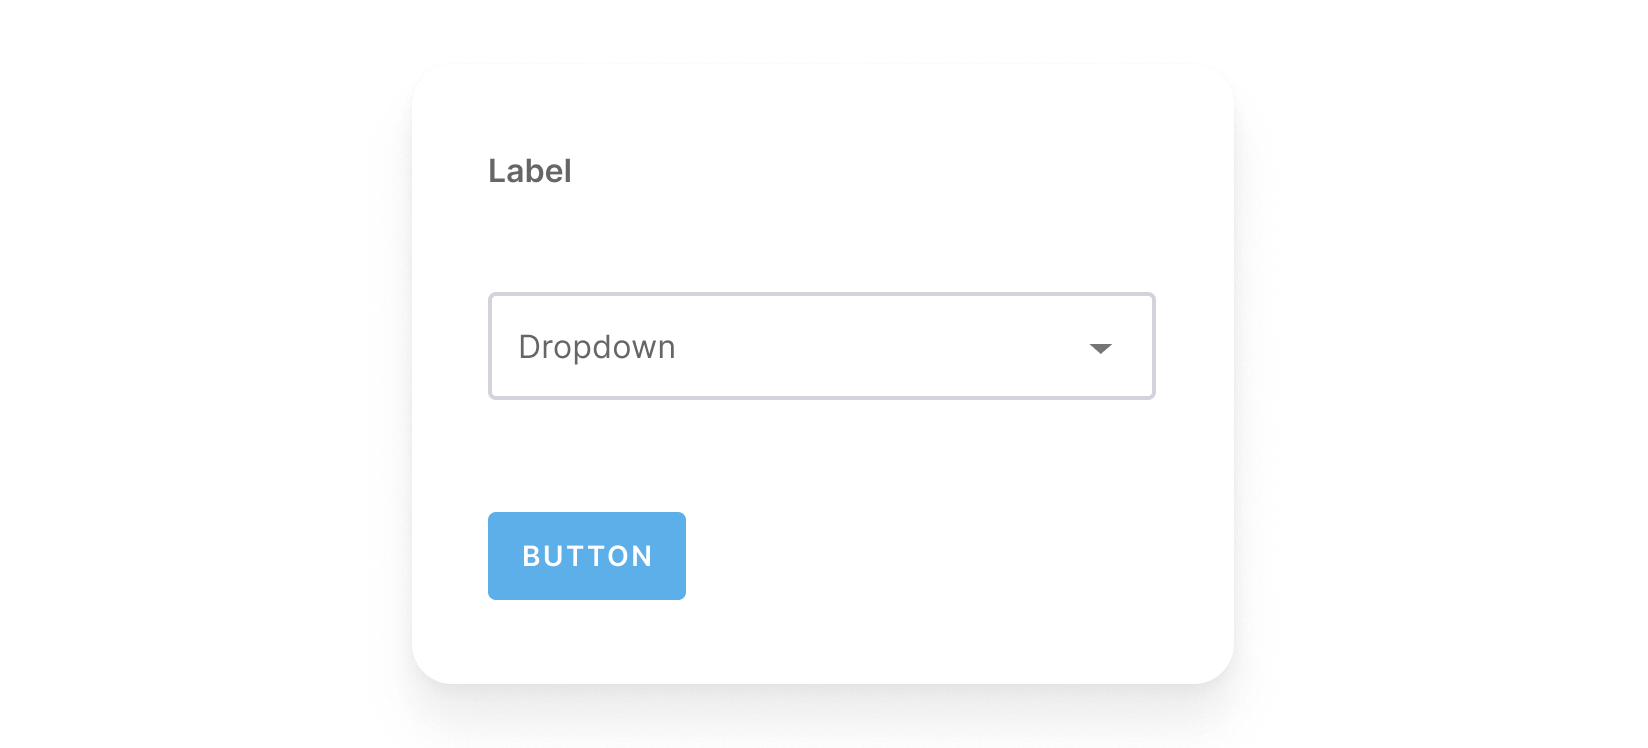 Three atomic elements: a form label, a dropdown selector, and button.